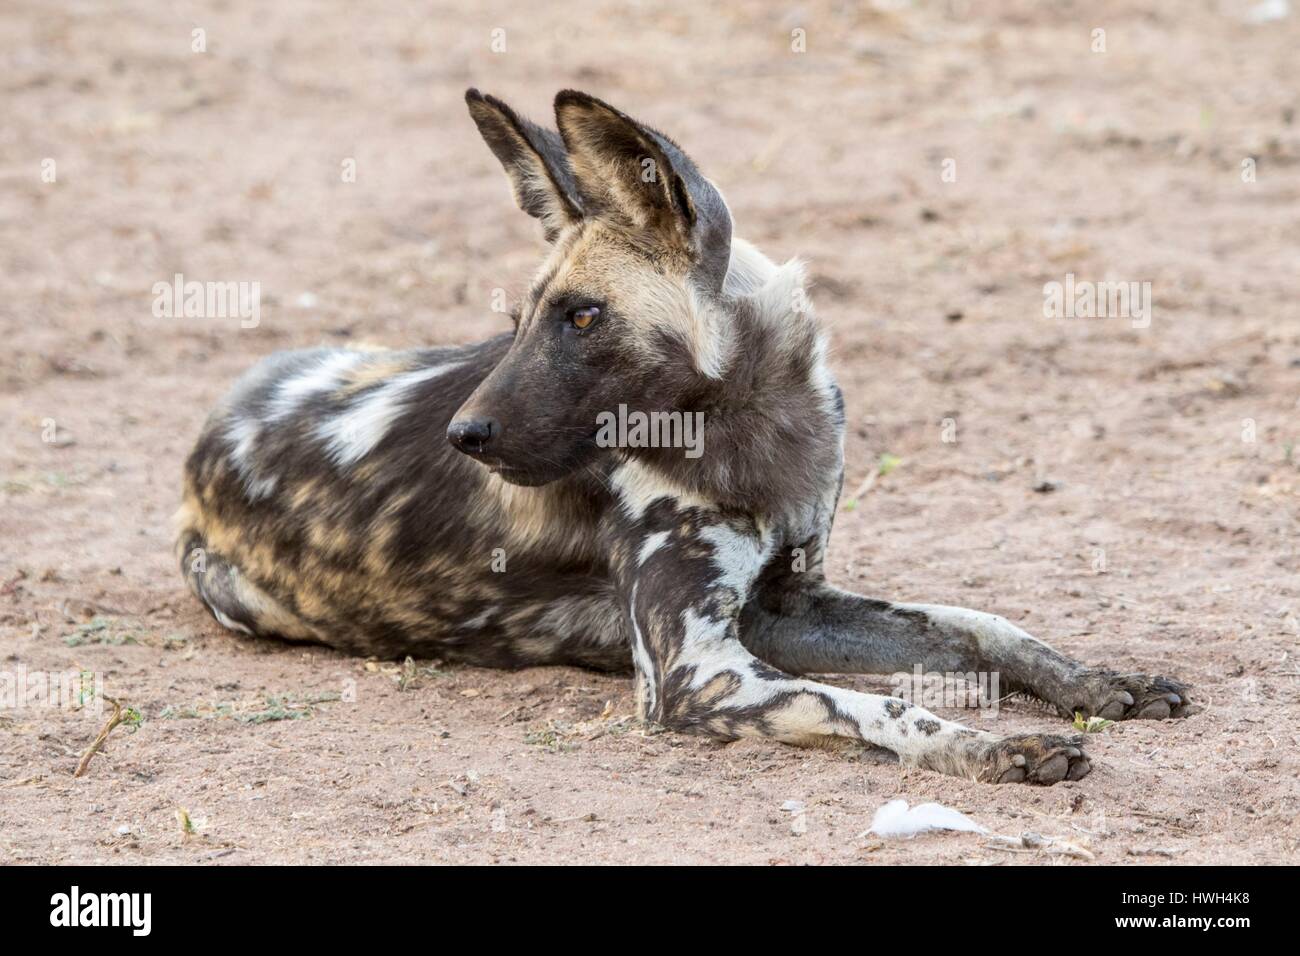 South Africa, Sabi Sands game reserve, wild dog (Lycaon pictus) Stock Photo